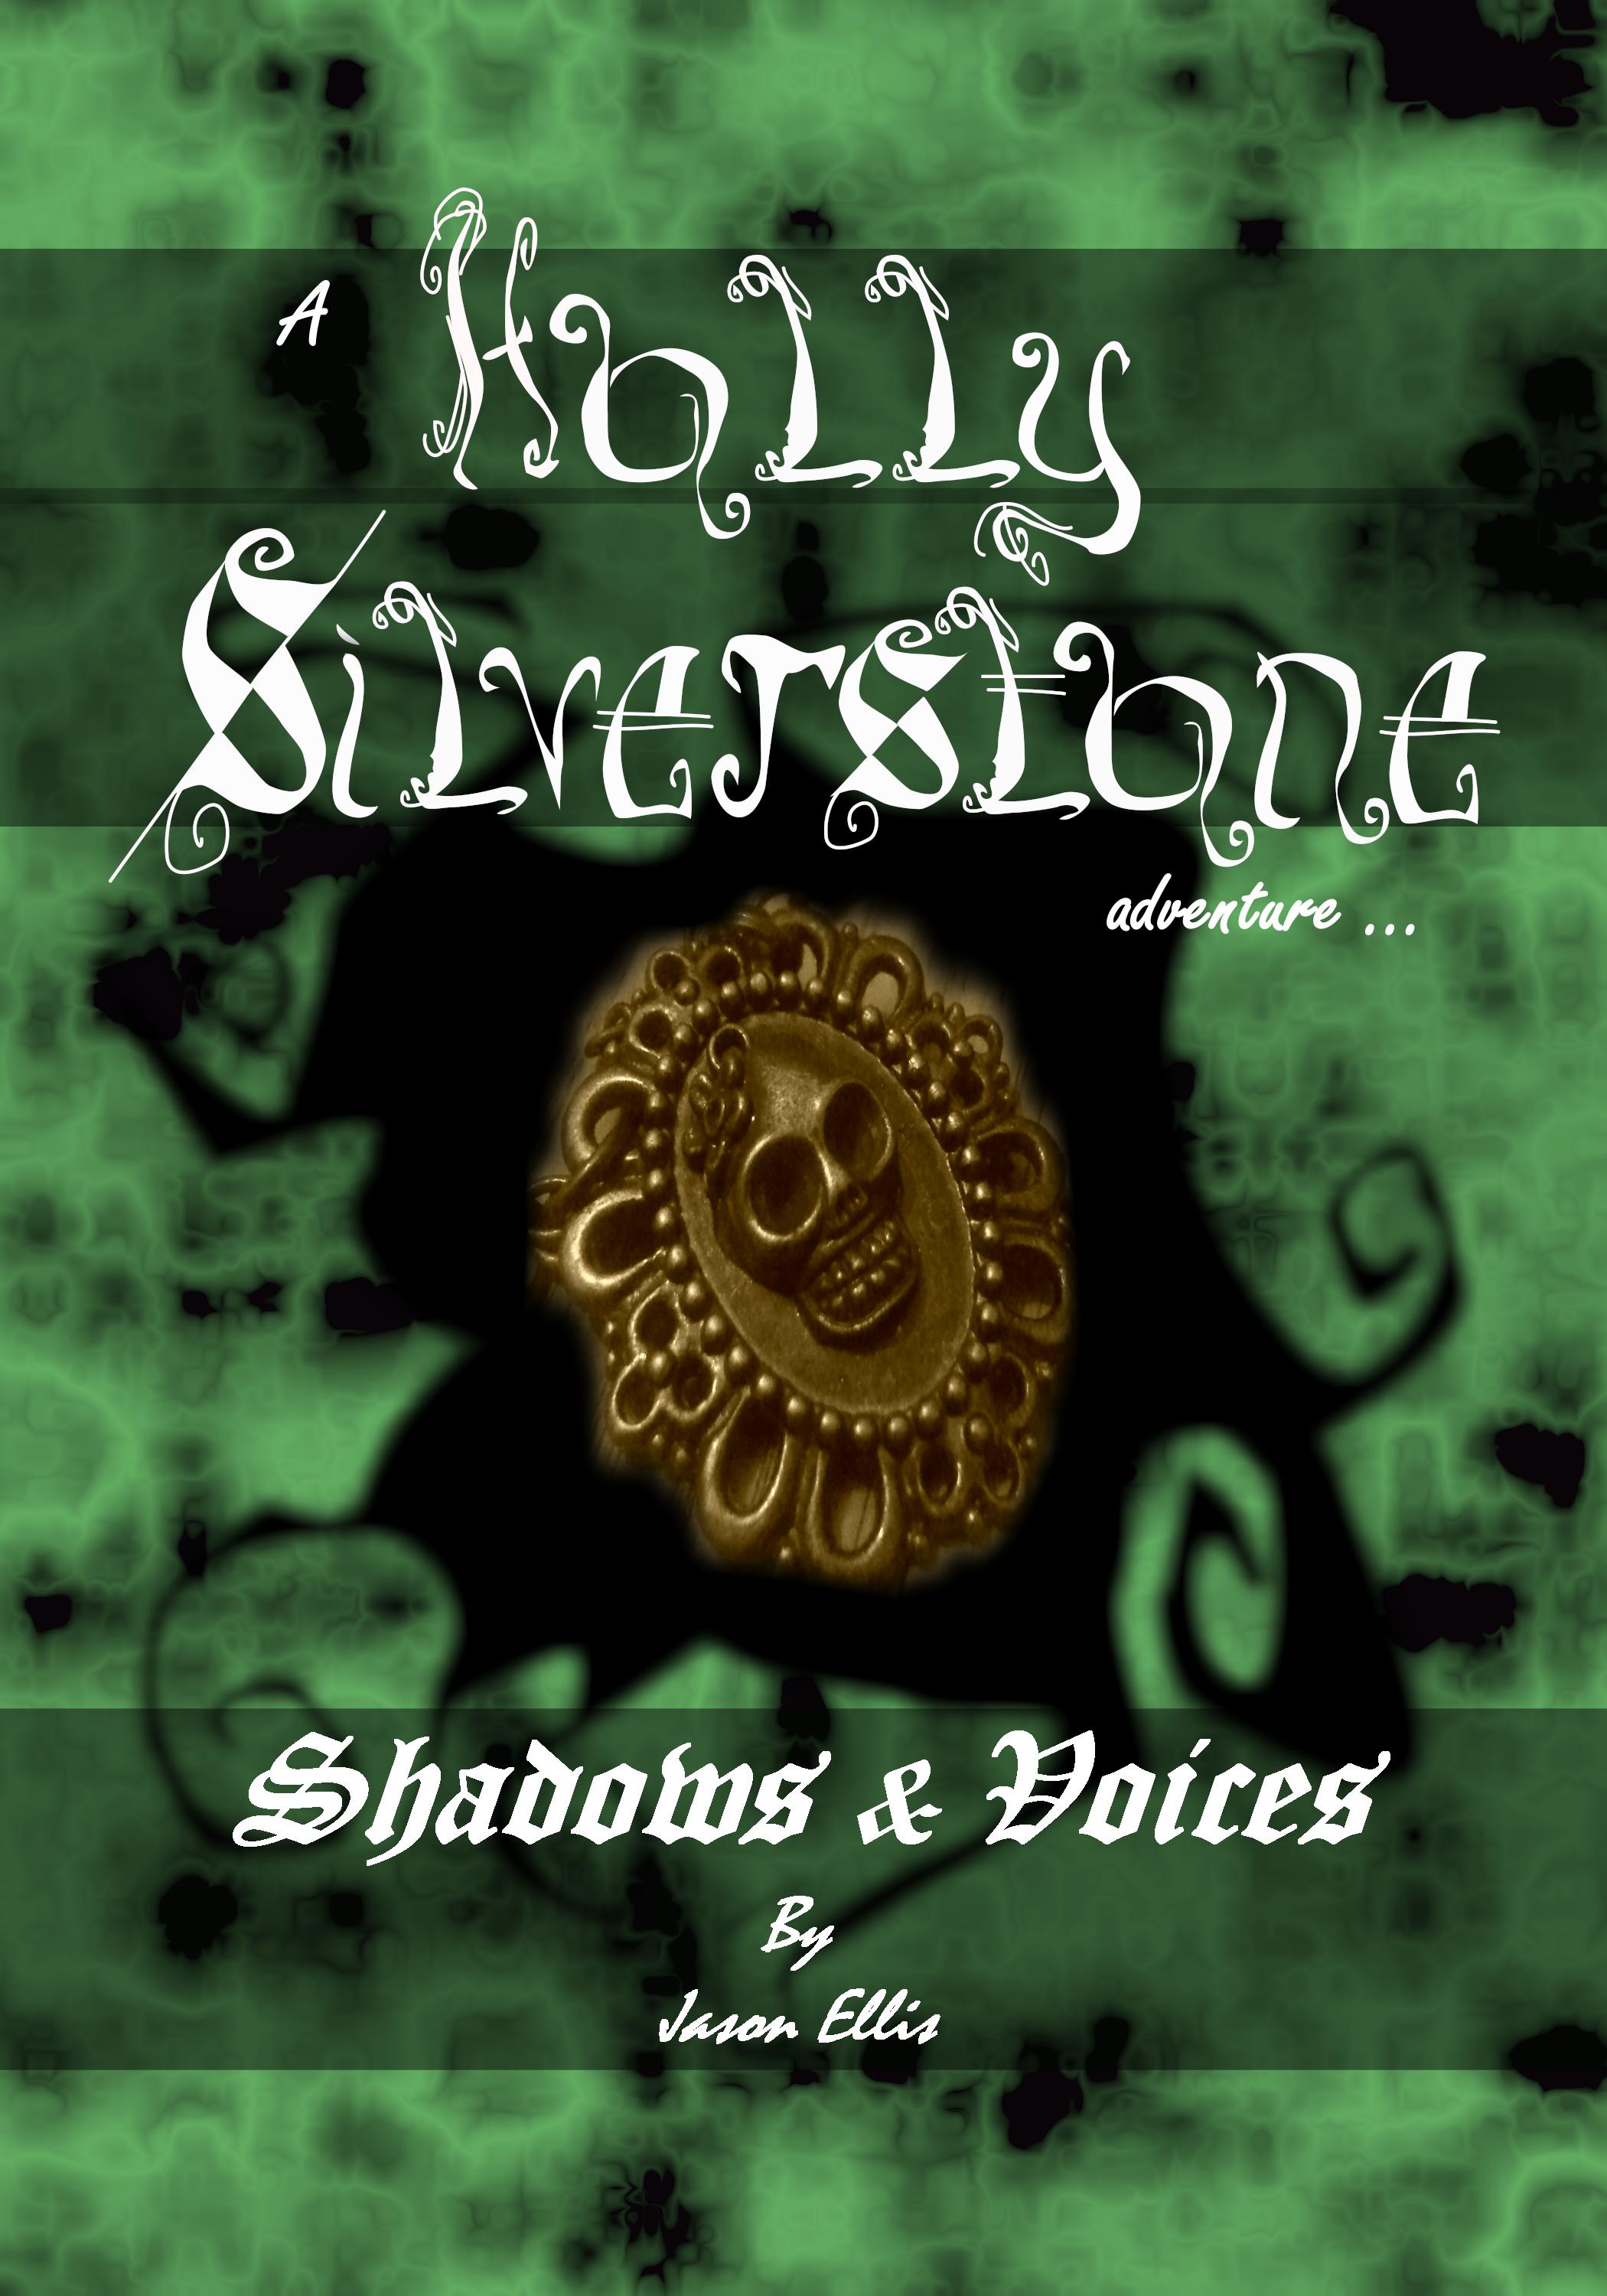 A Holly Silverstone adventure ... Shadows & Voices